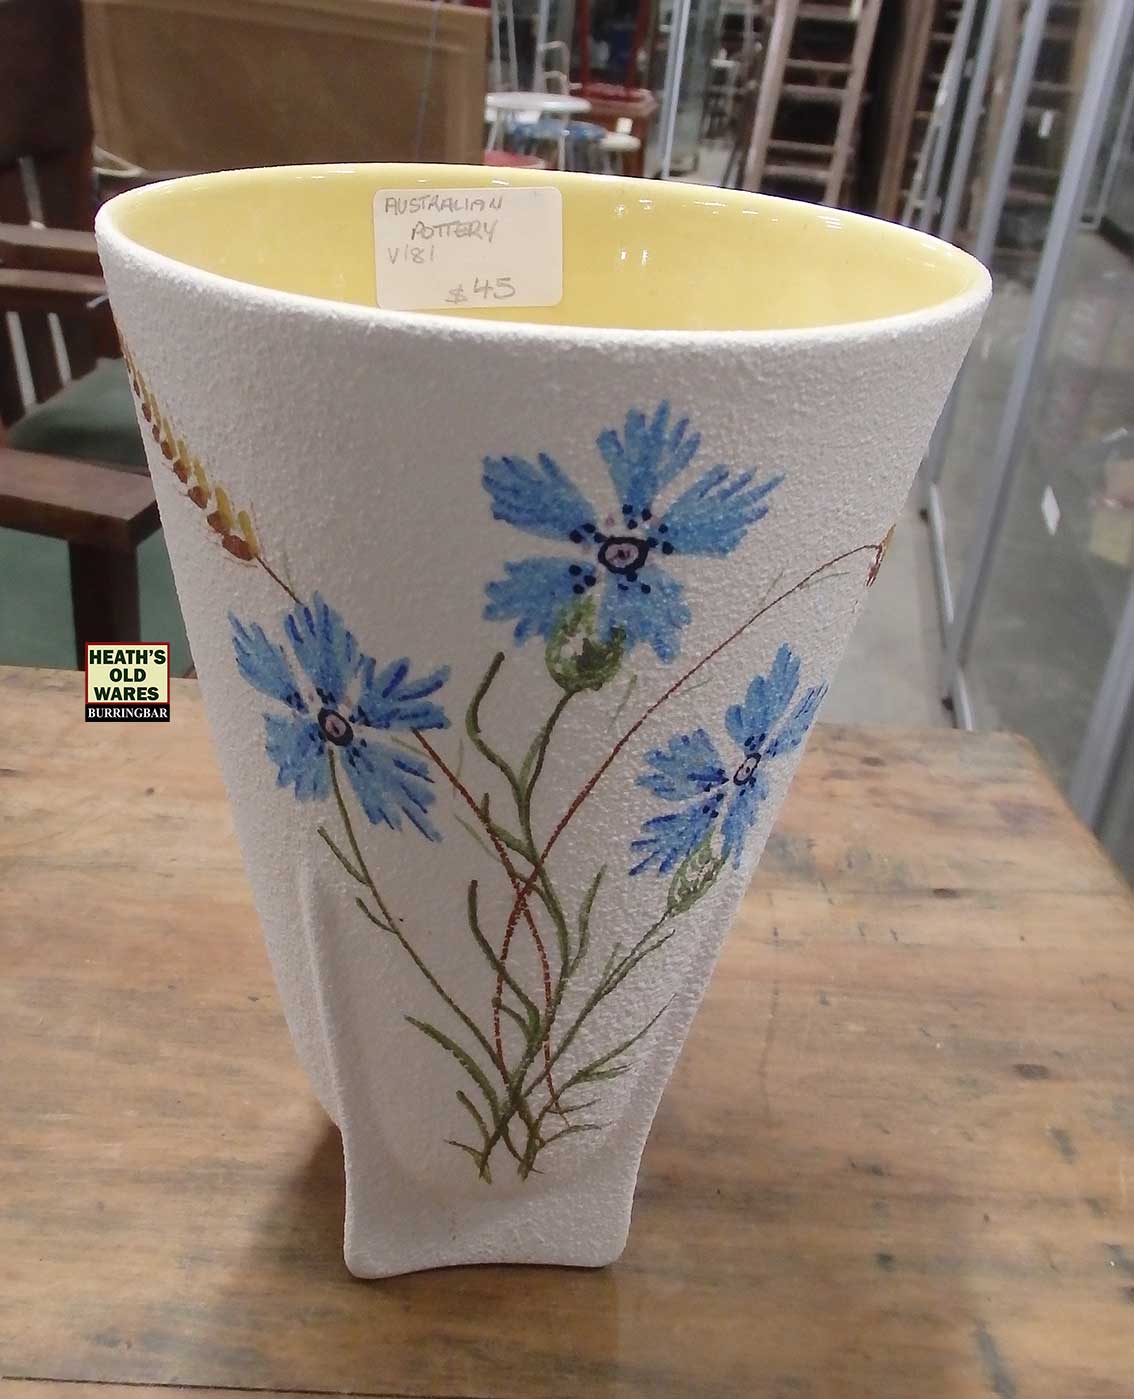 Australian pottery vase for sale at Heaths Old Wares, Collectables, Antiques & Industrial Antiques, 19-21 Broadway, Burringbar NSW 2483 Ph 0266771181 open 7 days